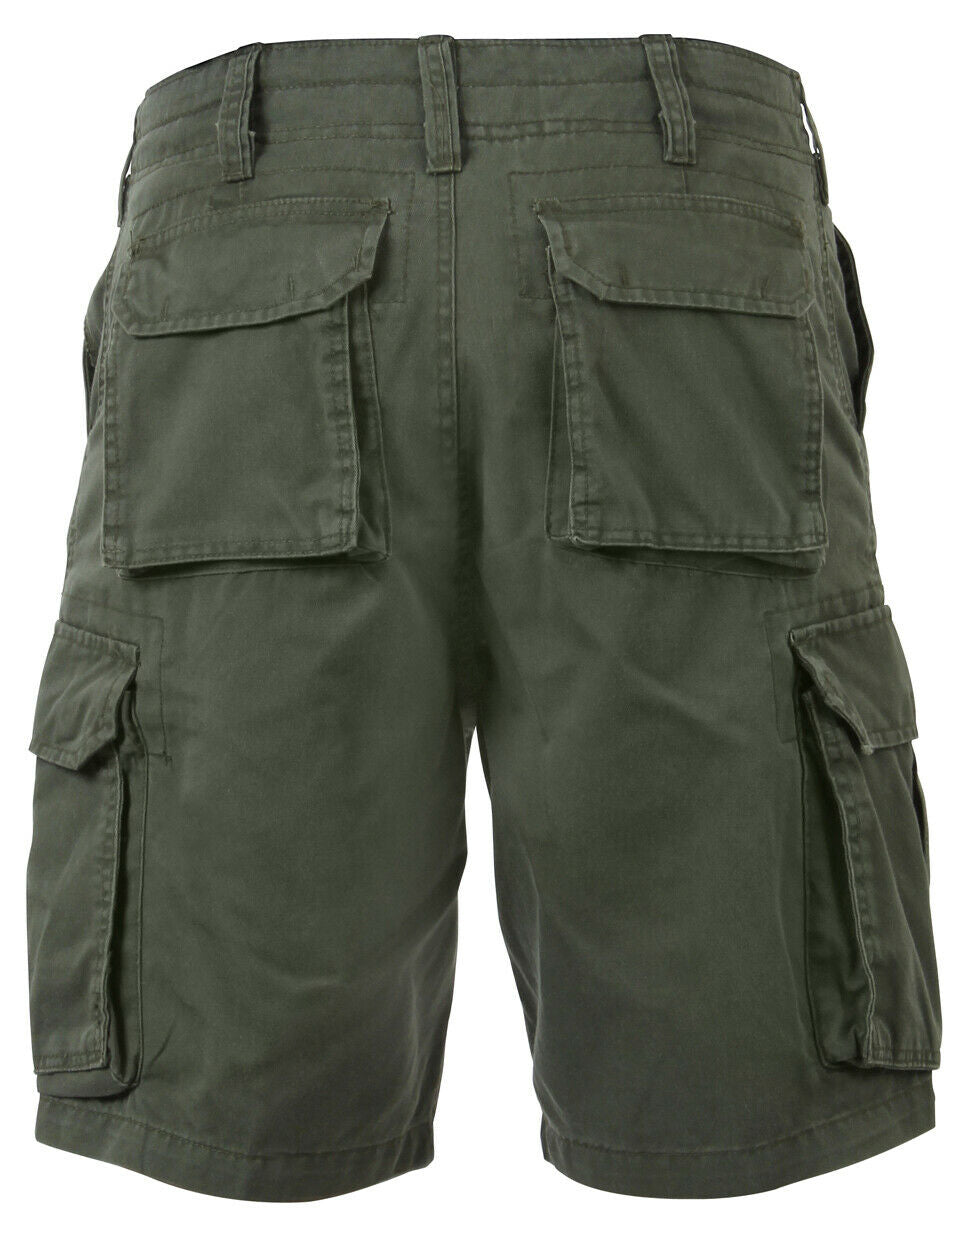 Rothco Vintage Solid Paratrooper Cargo Shorts - Olive Drab Green